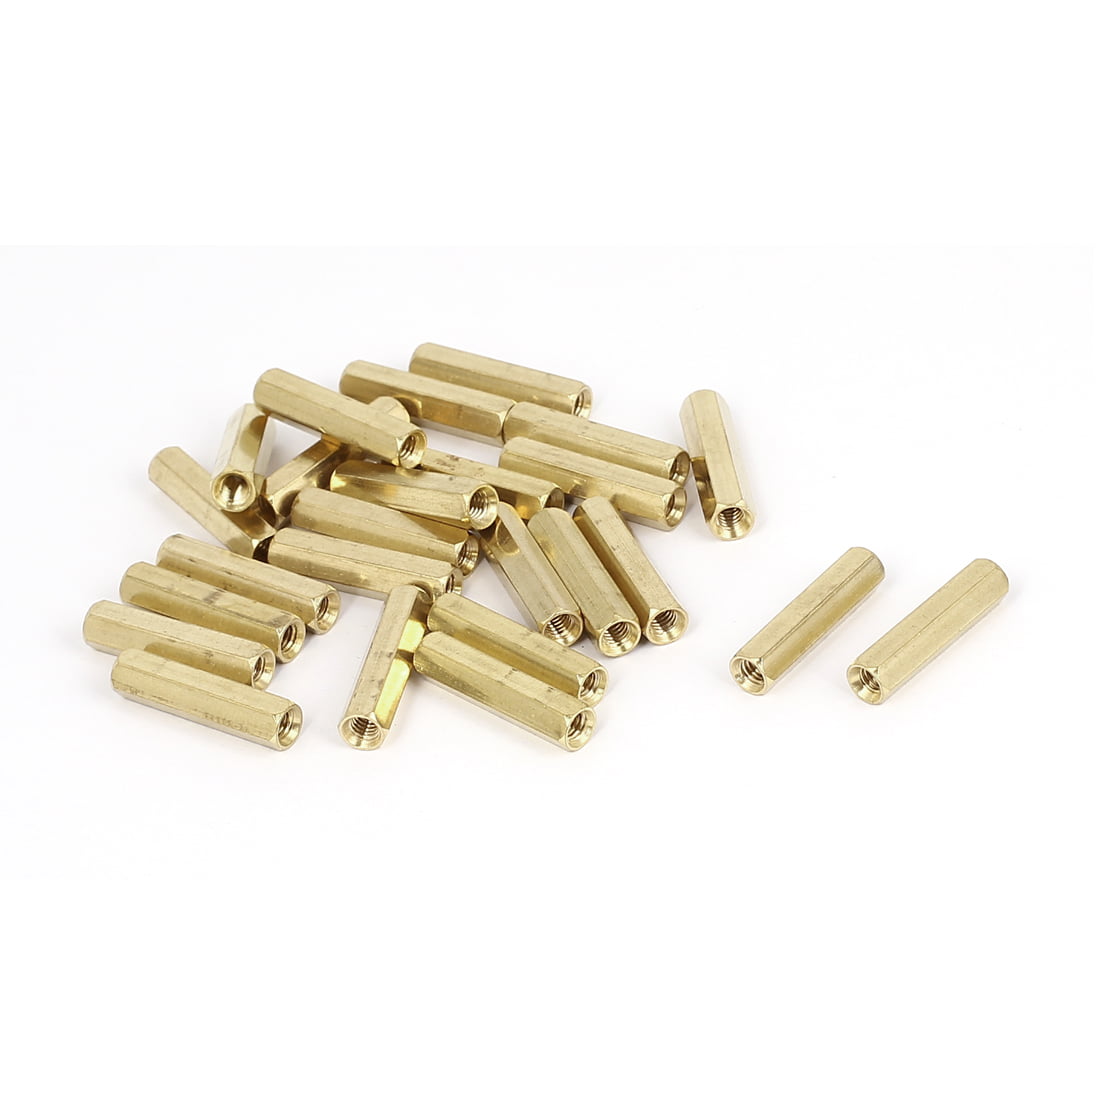 50Pcs M4 Hex Tapped Brass Spacer Stand-Off Pillar Female to Female Brass Threade 